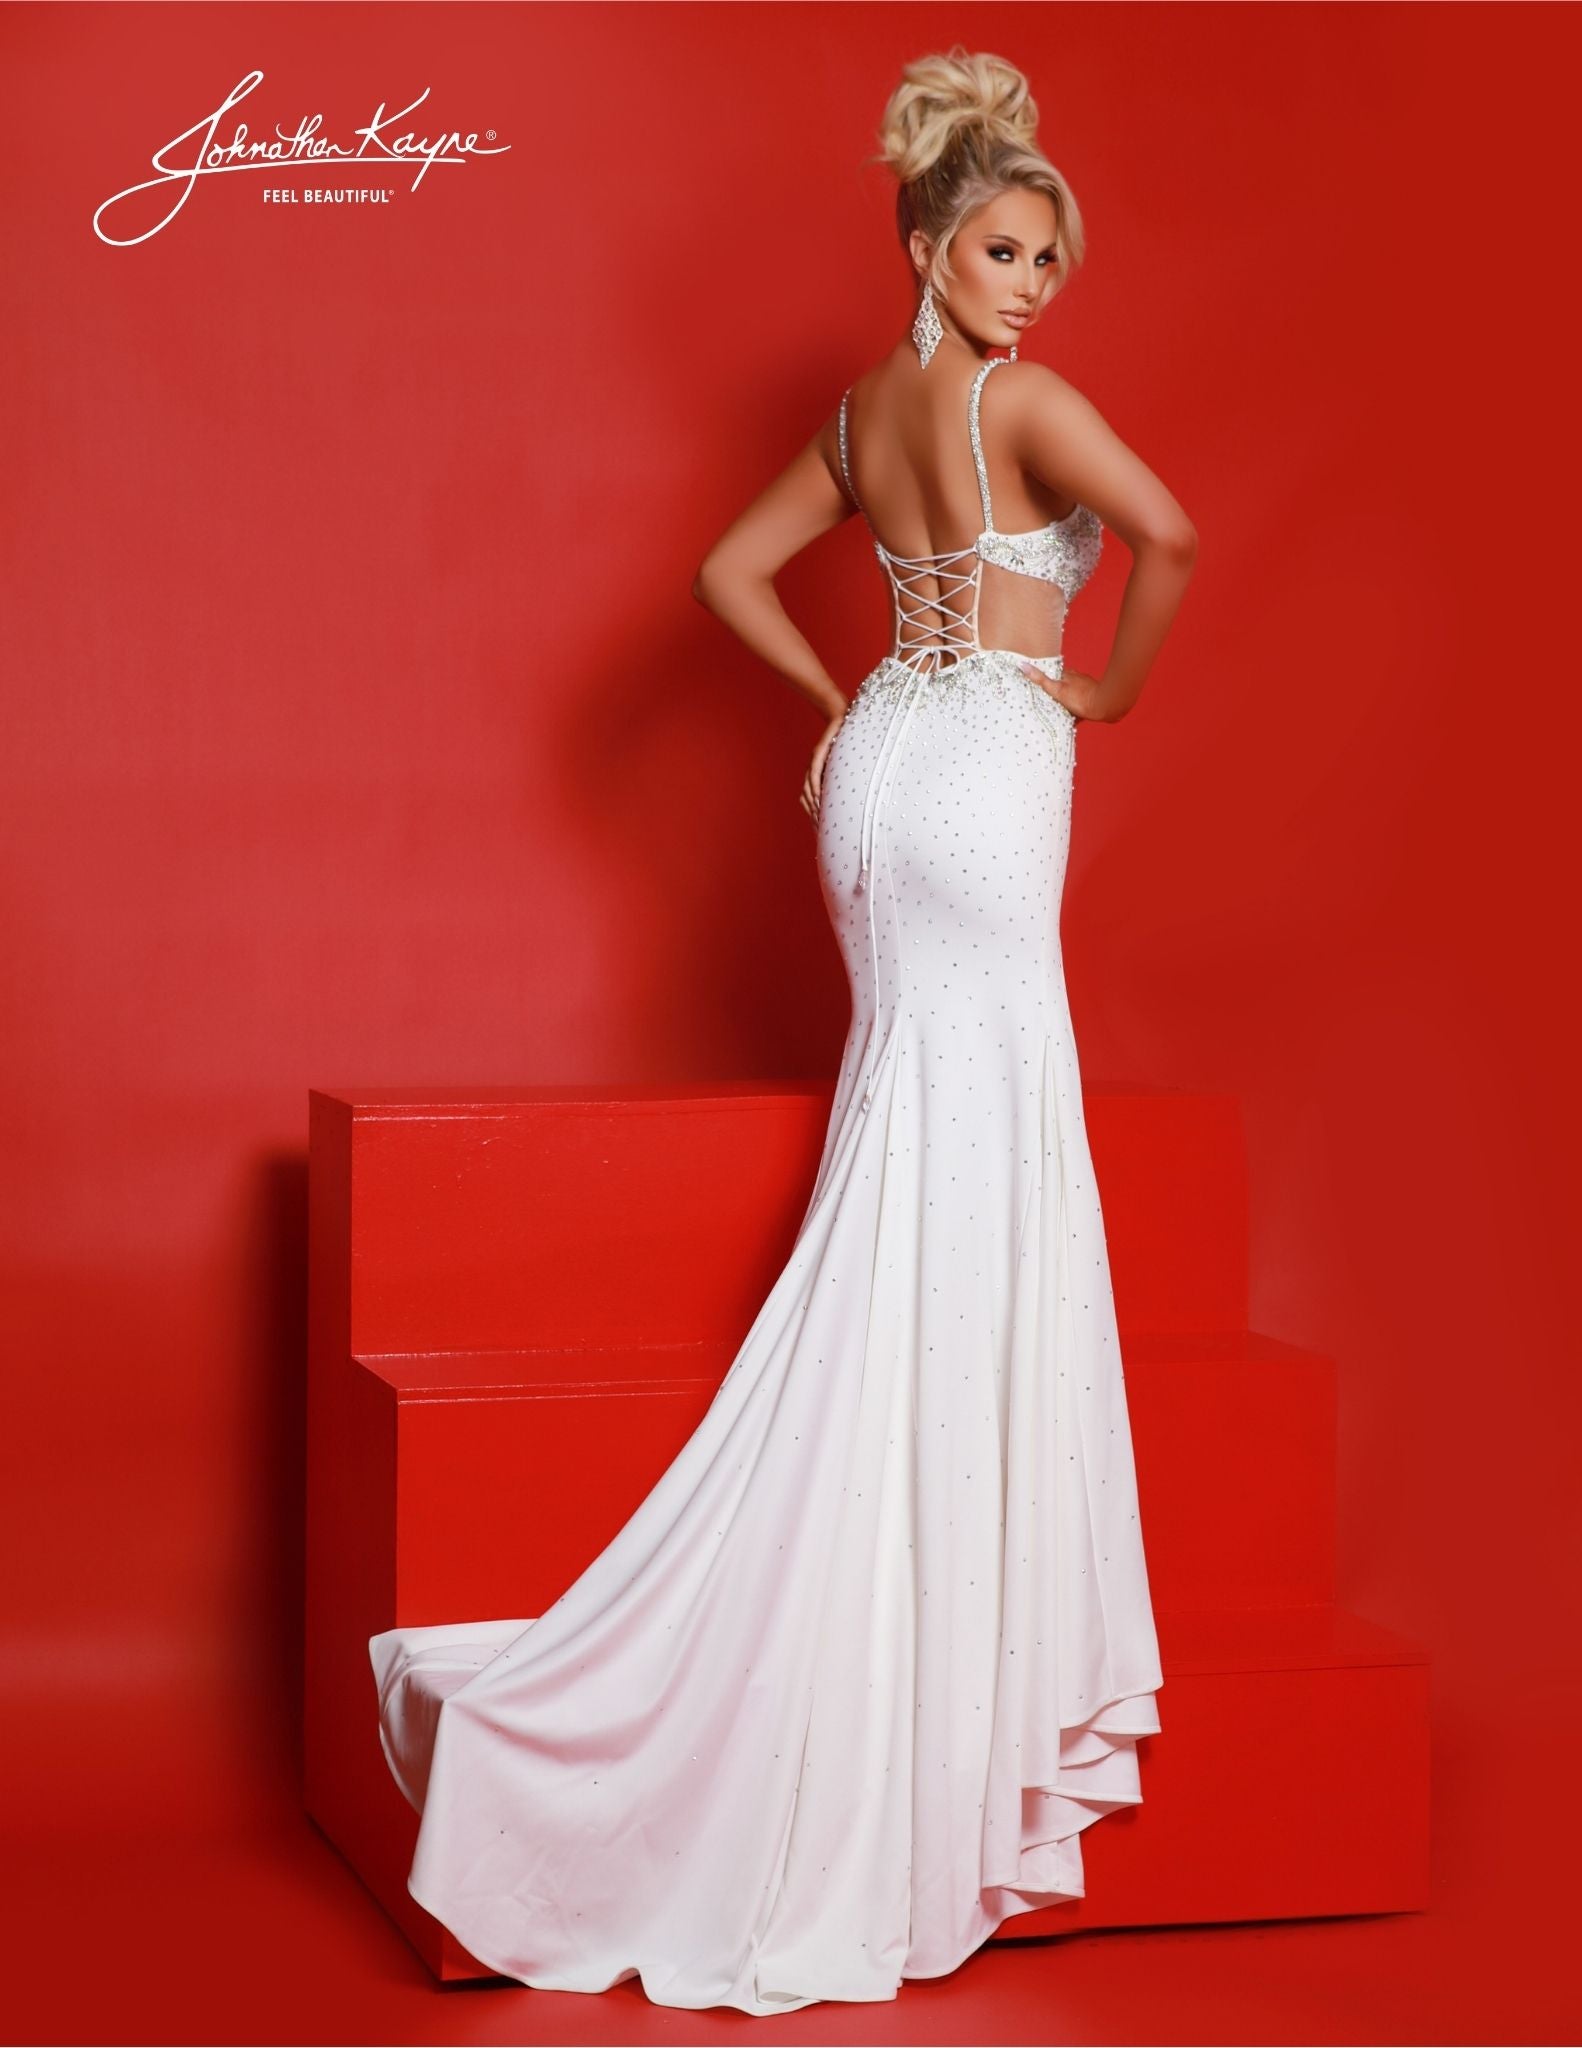 Johnathan Kayne 2846 is the perfect long prom dress for special occasions. Featuring a fitted plunging neckline and a classic high slit, this sophisticated formal pageant gown is complete with side cut outs. Look your best in this stunning evening look. Steal the spotlight in this heavy knit gown. Flirty side cutouts, thigh-high slit, and a corset closure transform this dress into a show-stopping statement of style.